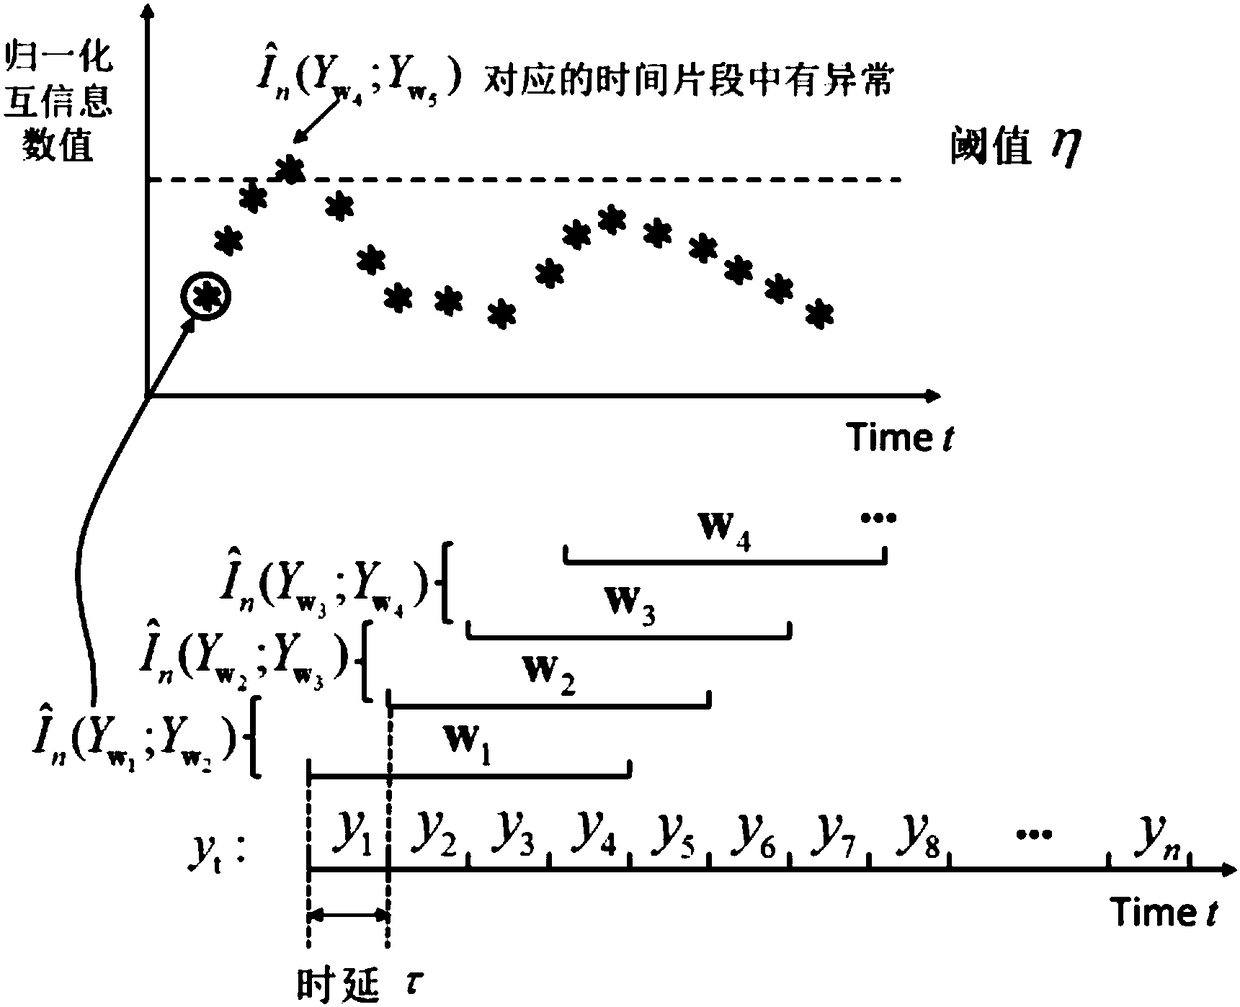 Time sequence anomaly detection method based on normalized mutual-information estimation